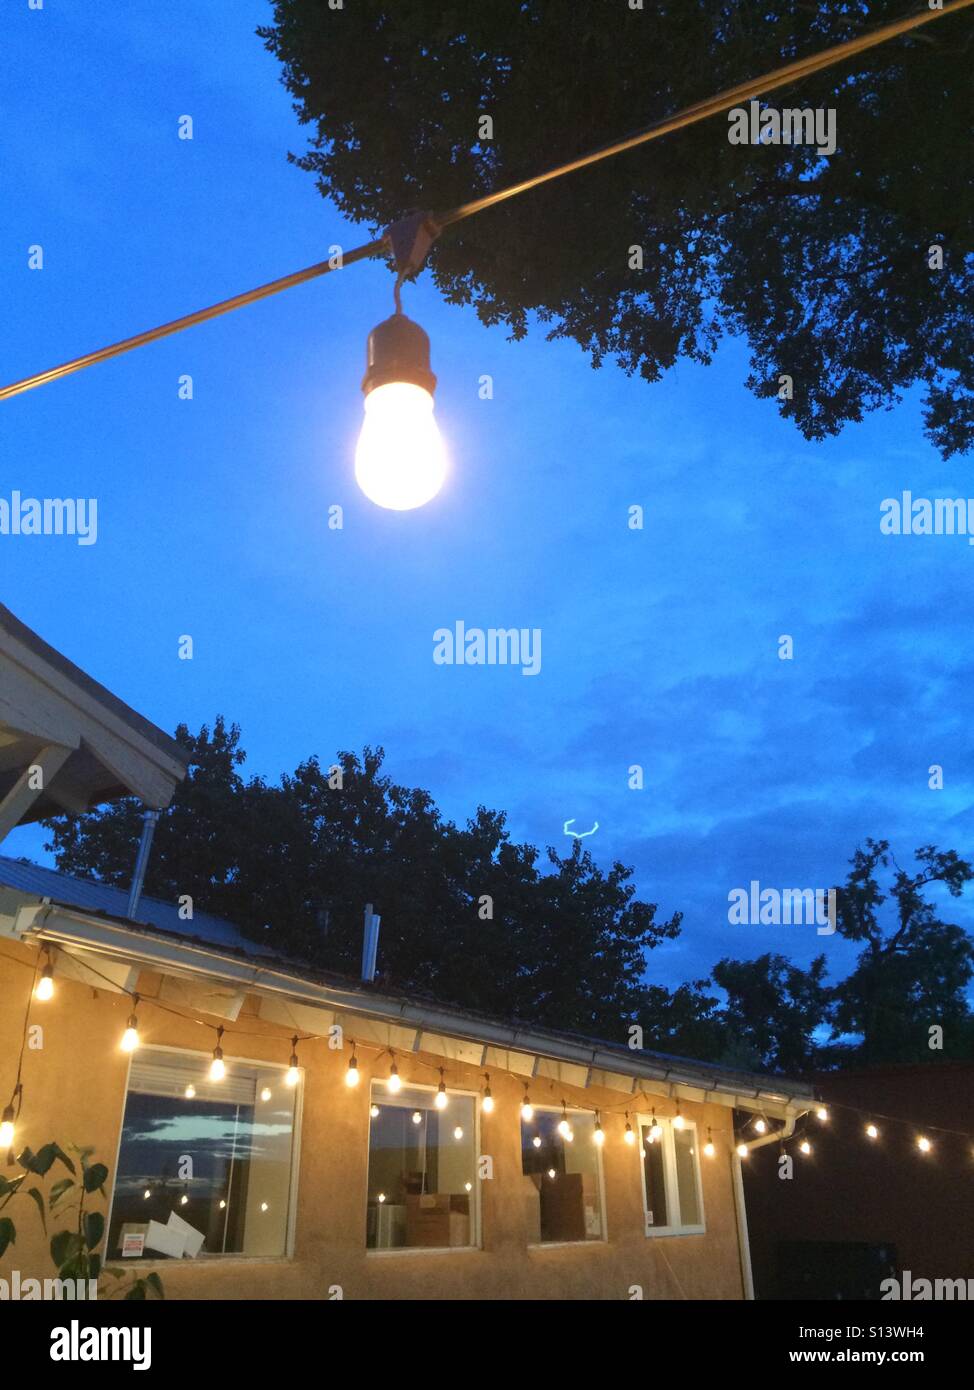 Decorative lights hang in a backyard space. Stock Photo